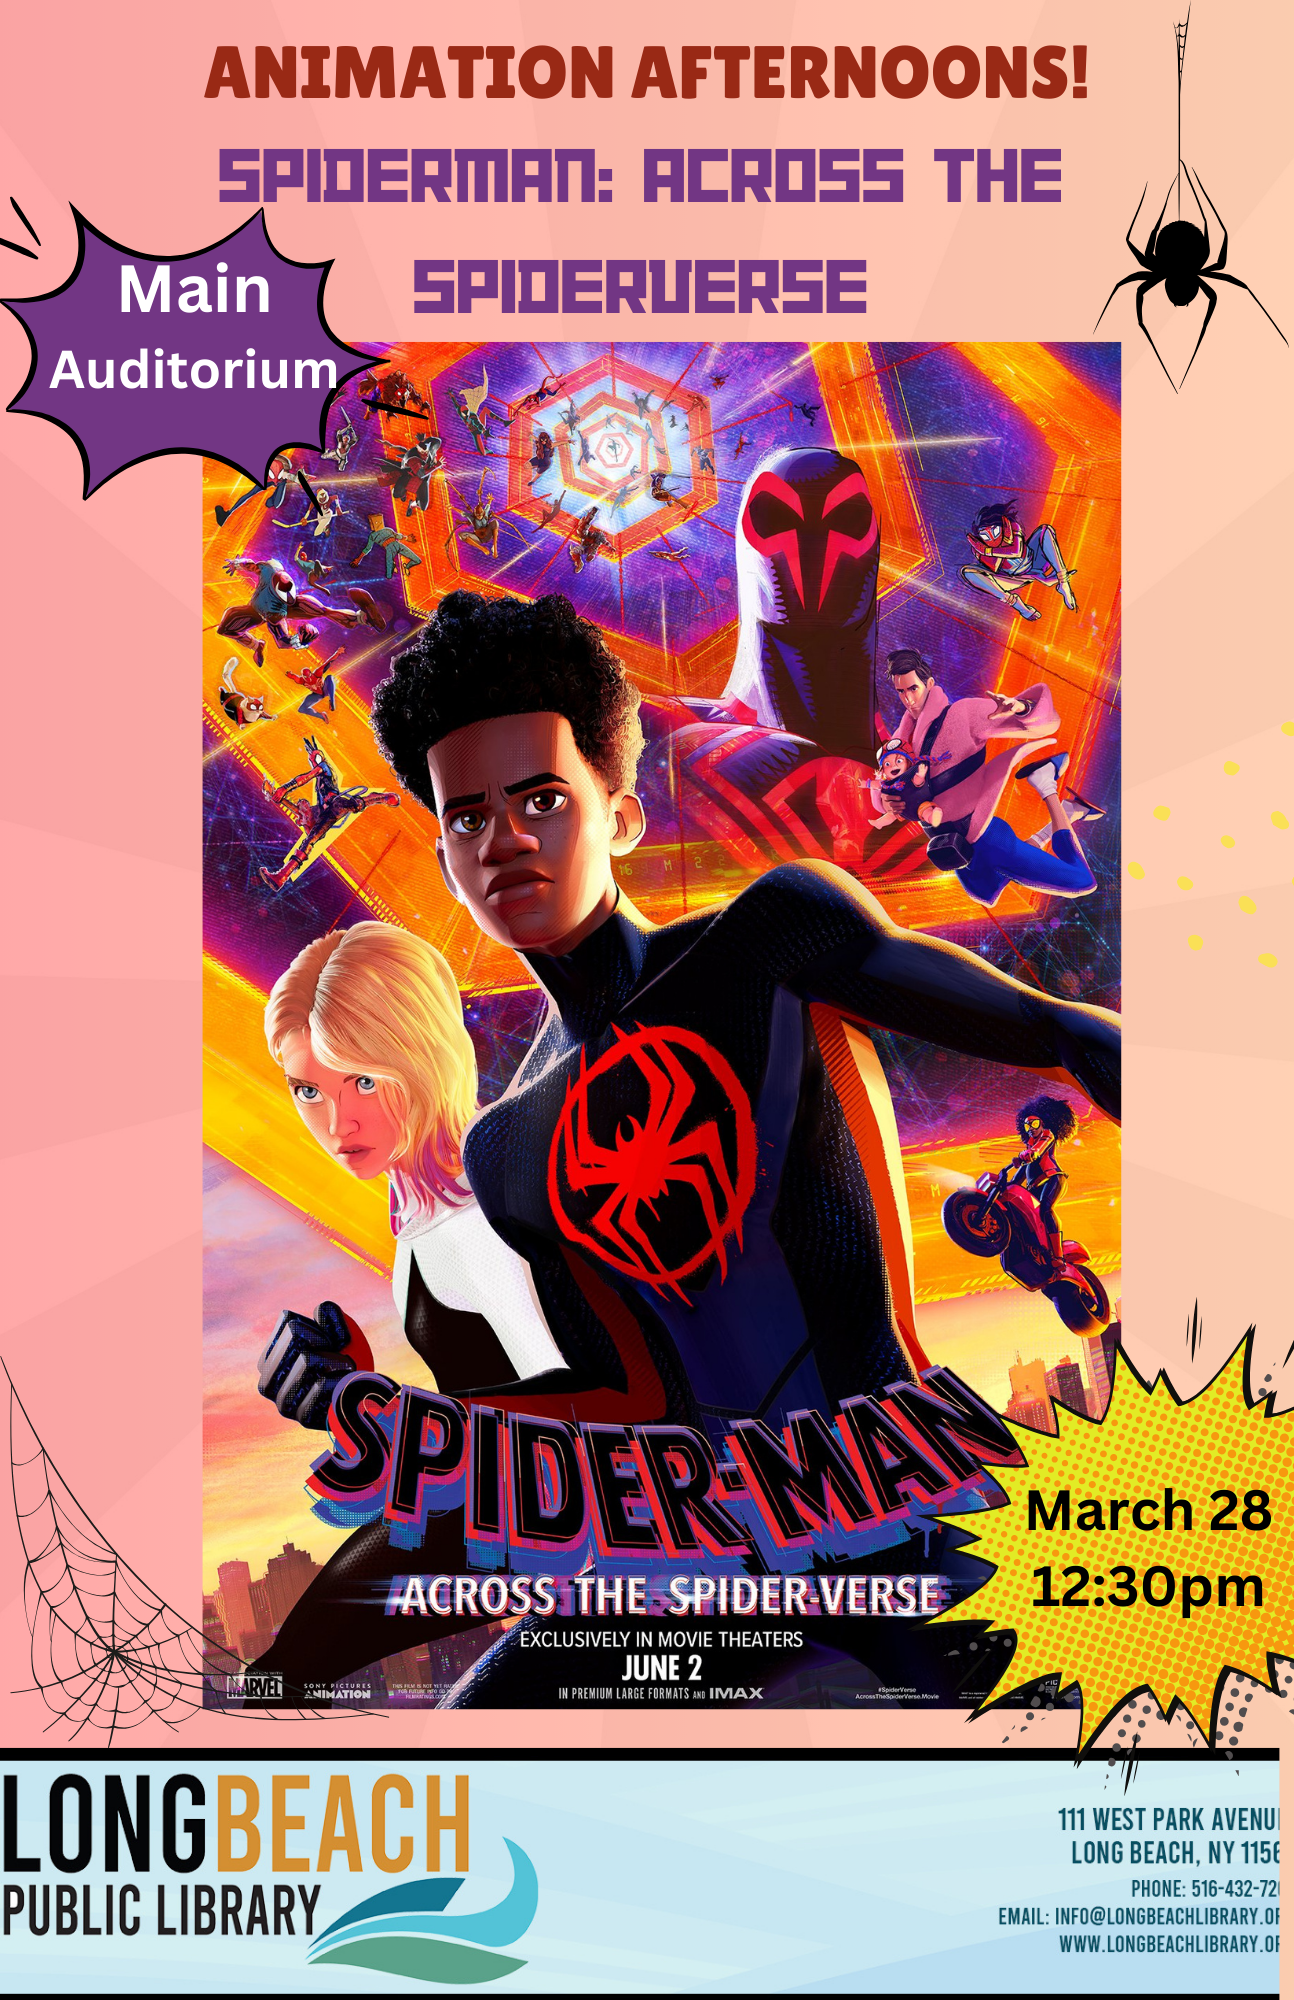 Poster advertising Spiderman Across the Spiderverse